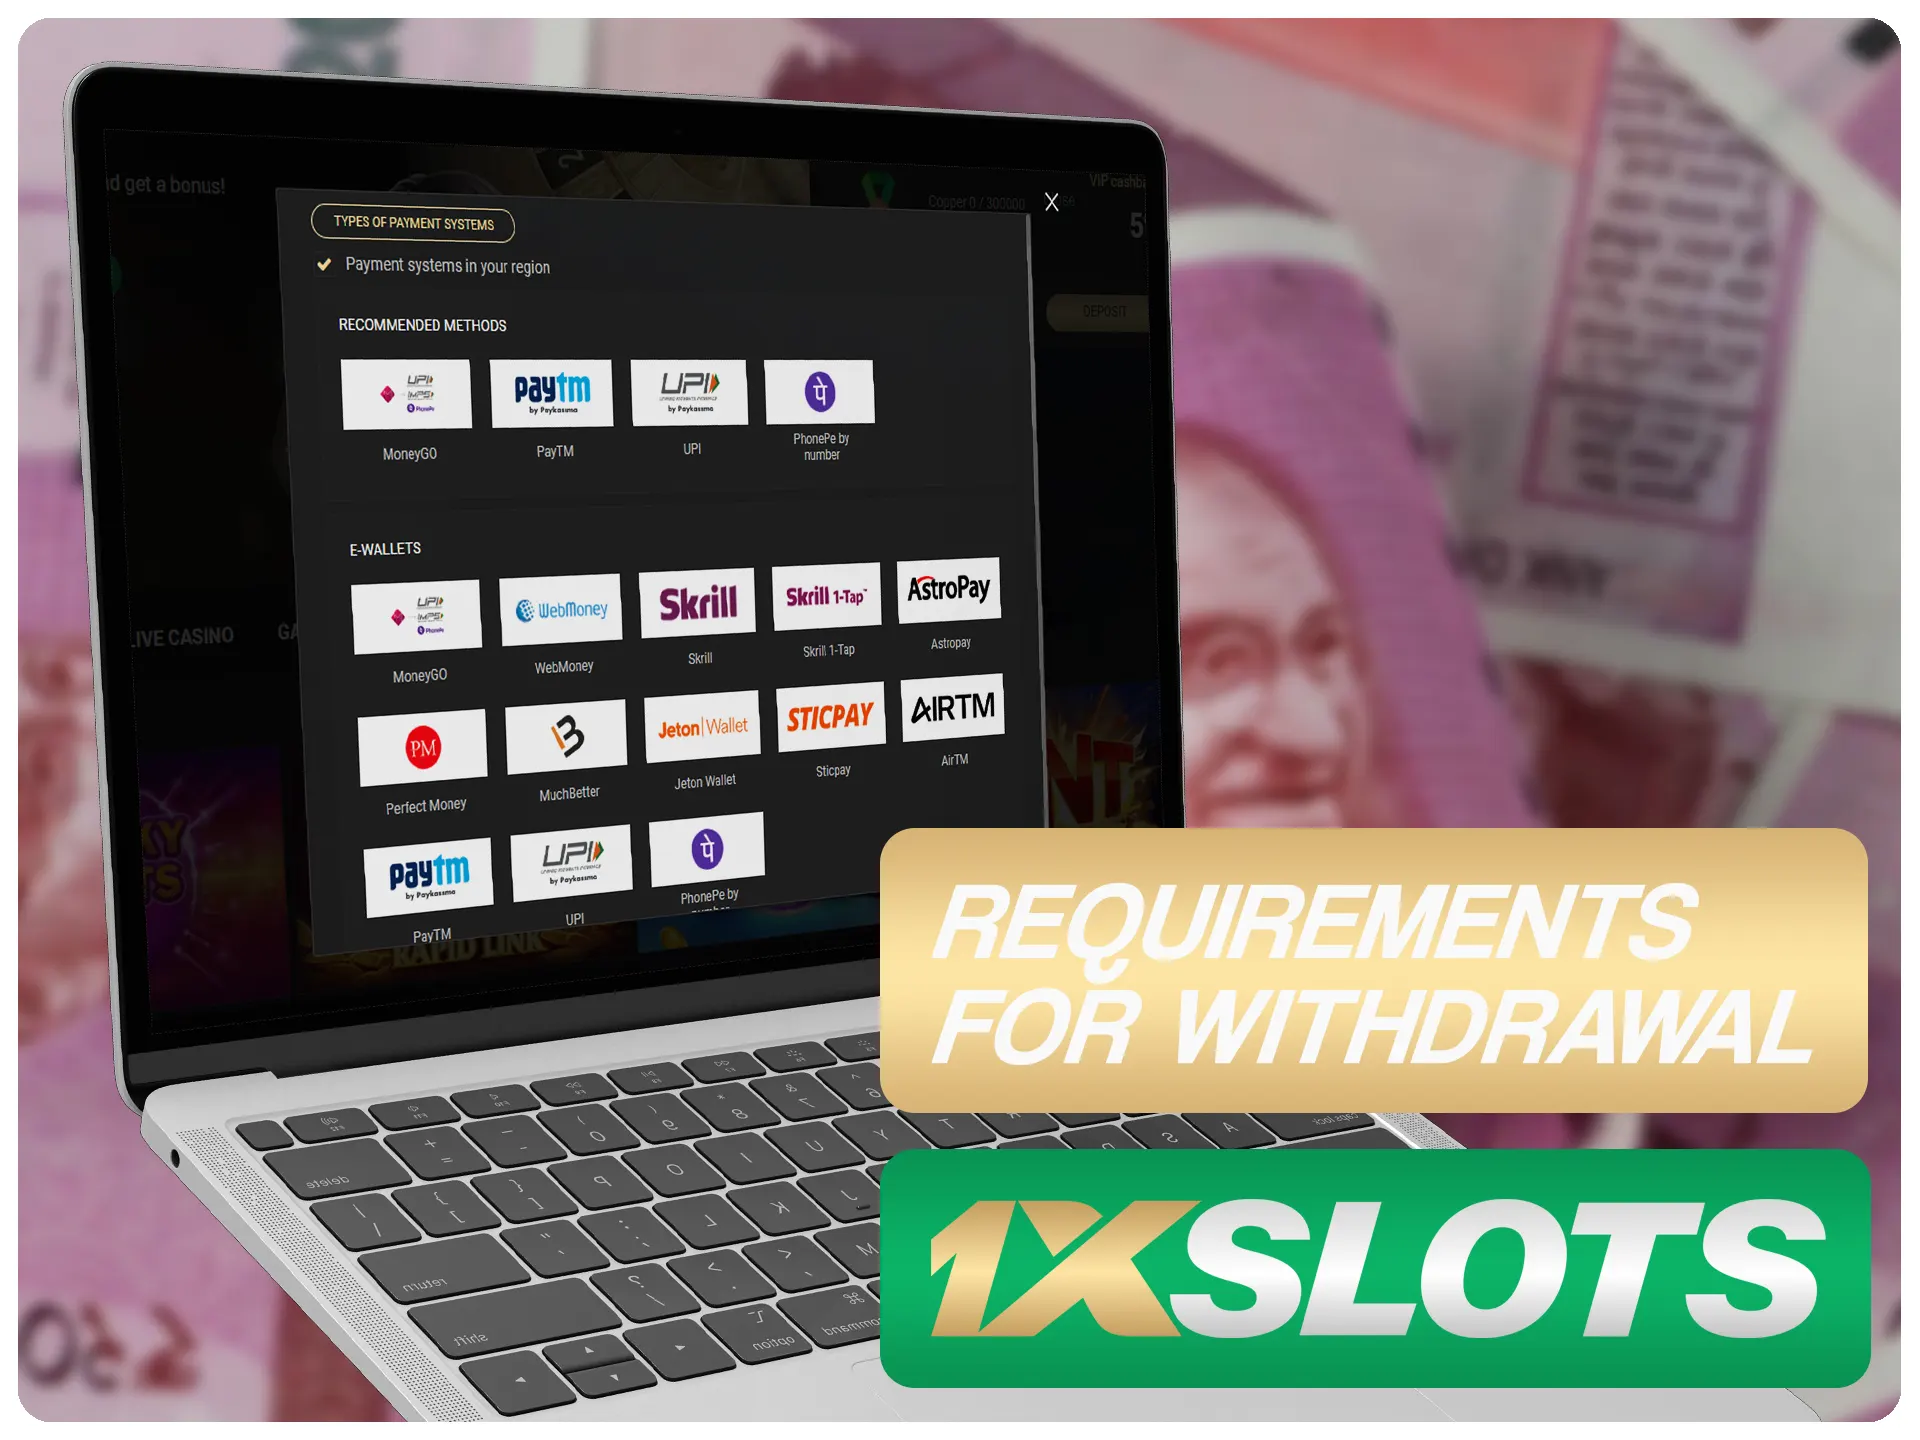 Make sure that your follow all 1xSlots rules while making withdraw.